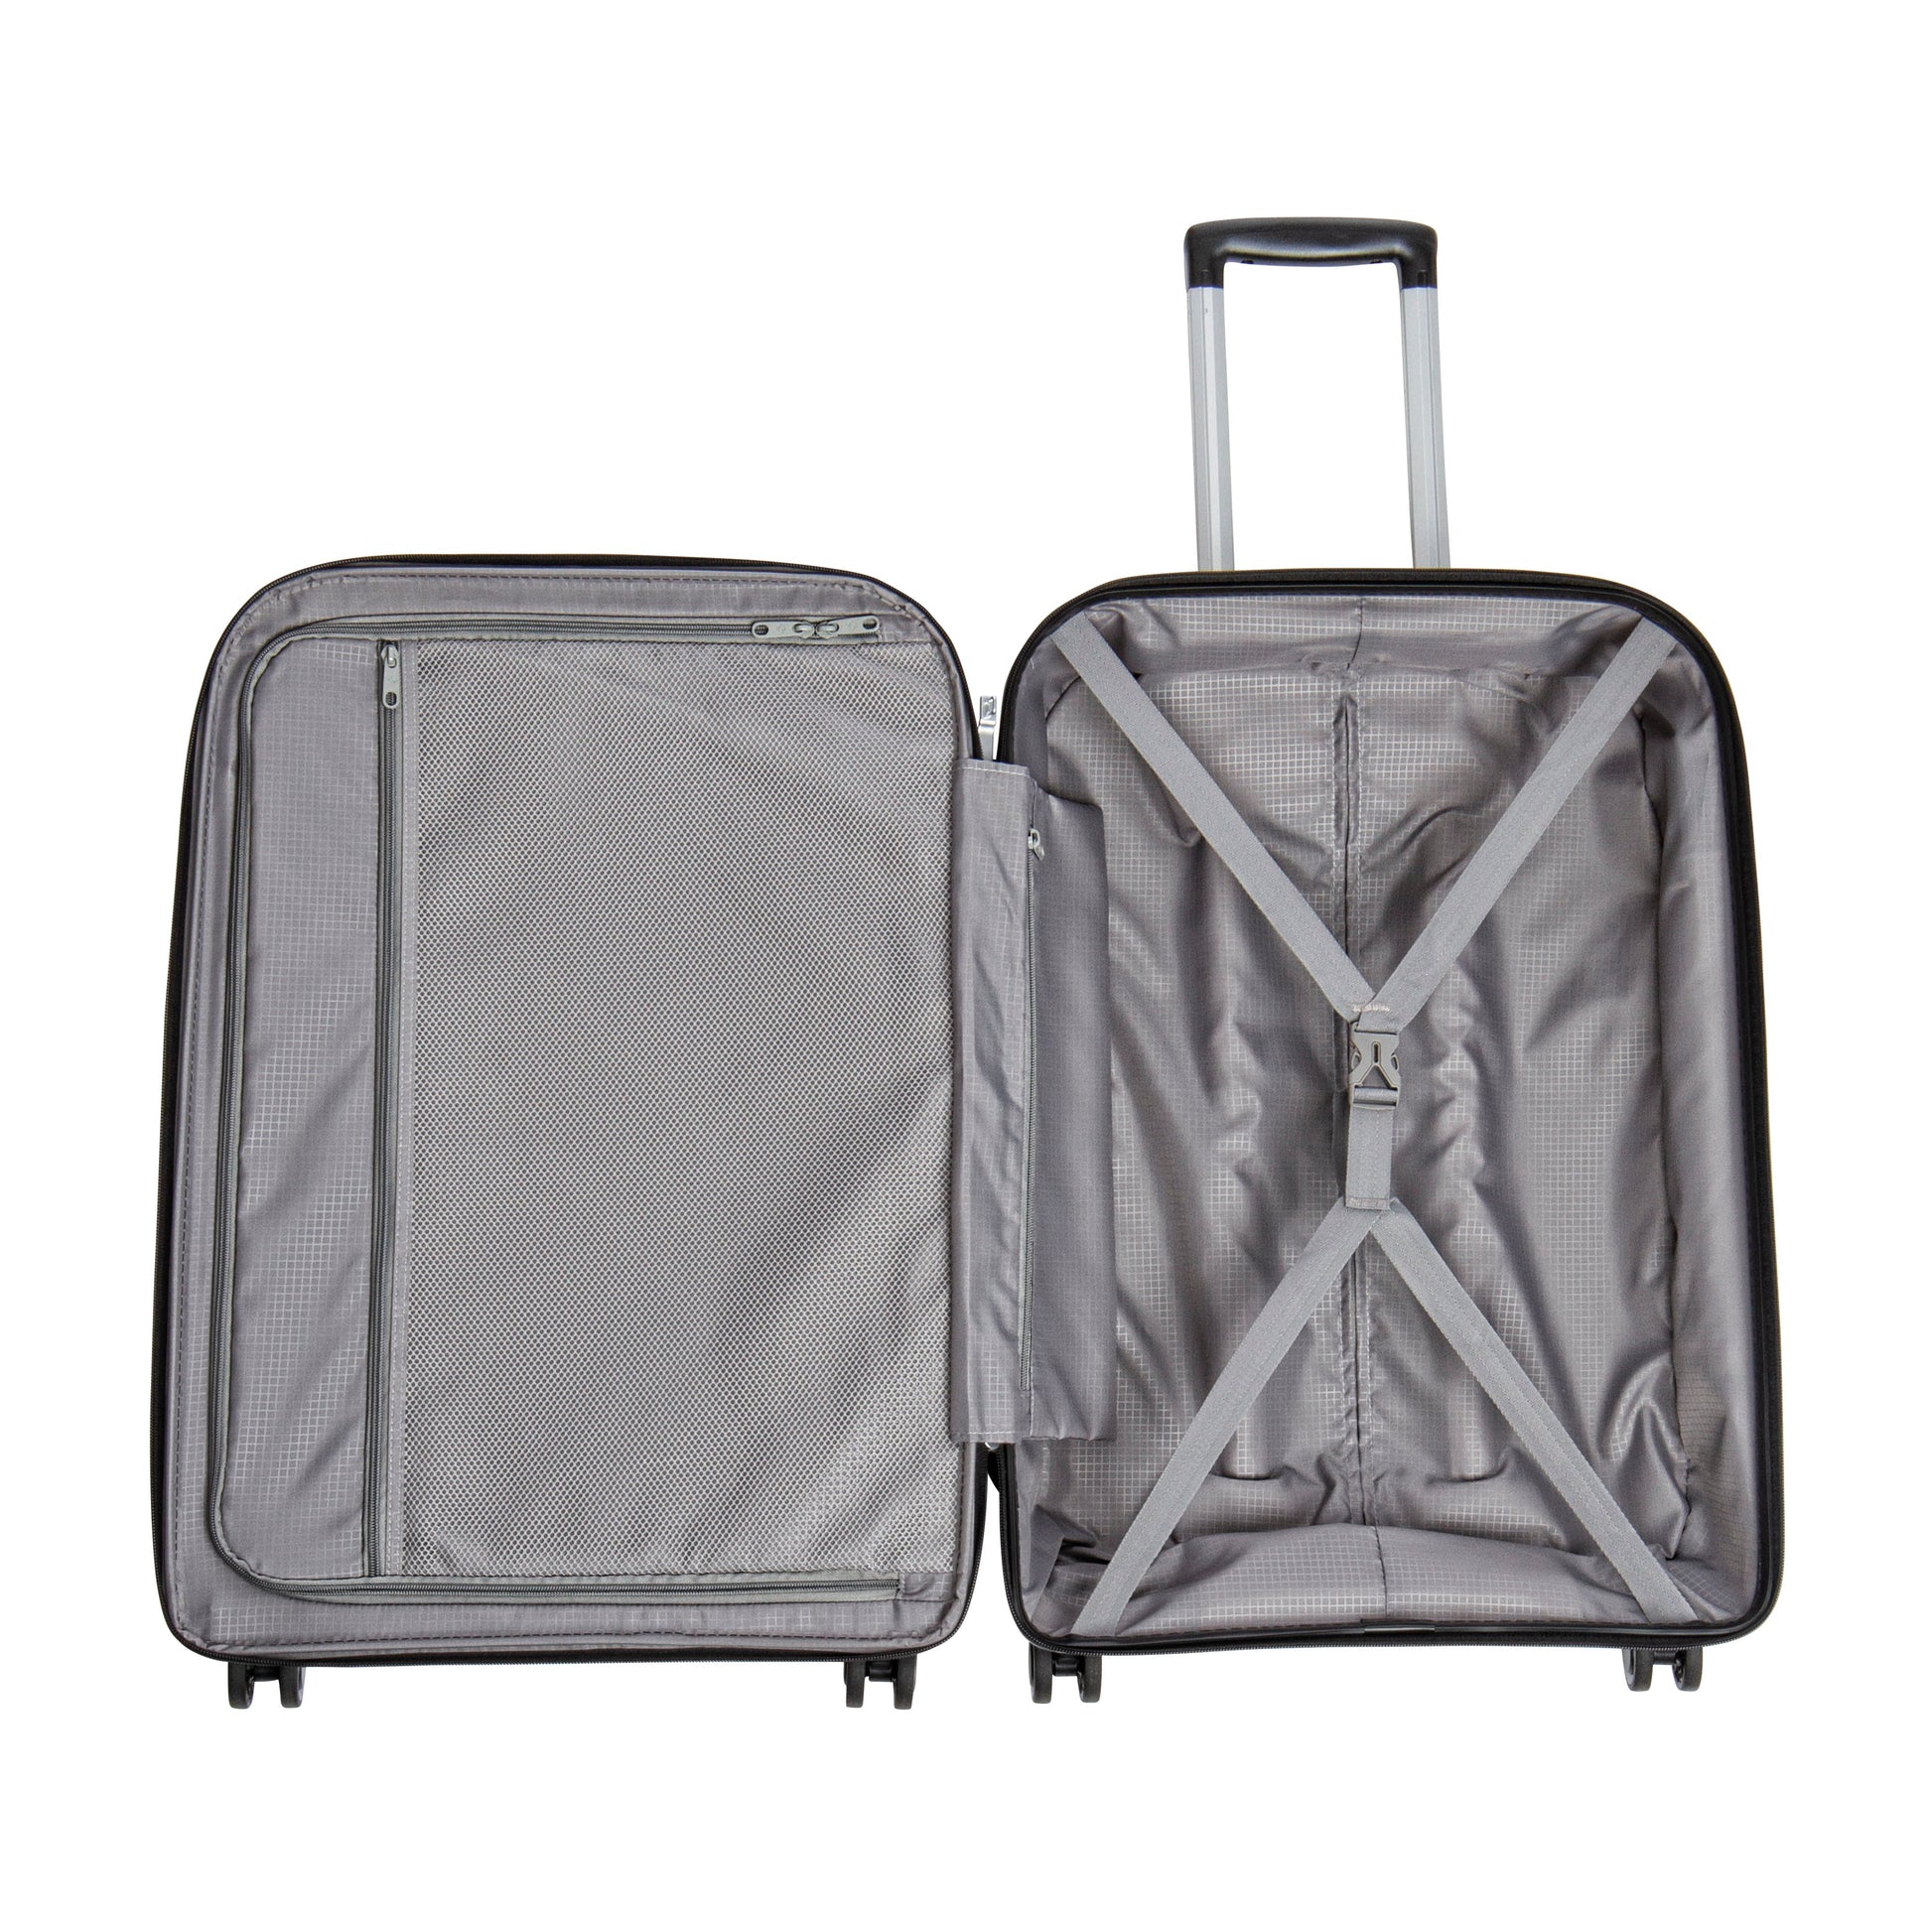 Samsonite Arrival NXT Spinner Expandable 3-Piece Luggage Set